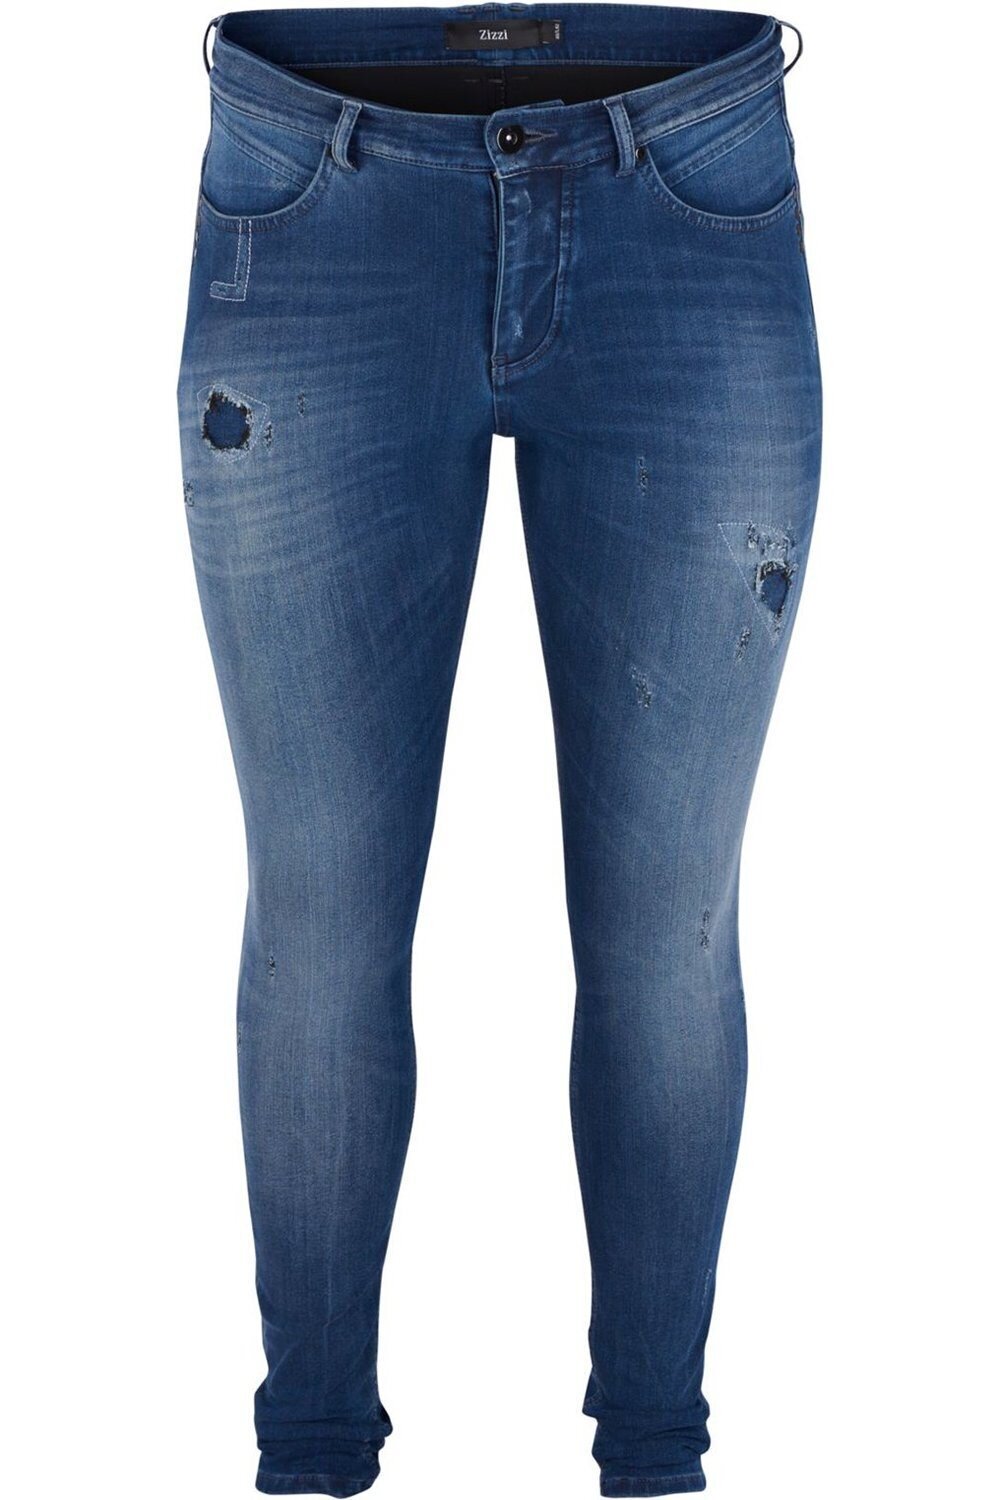 Jeans Zizzi Amy destroyed effects